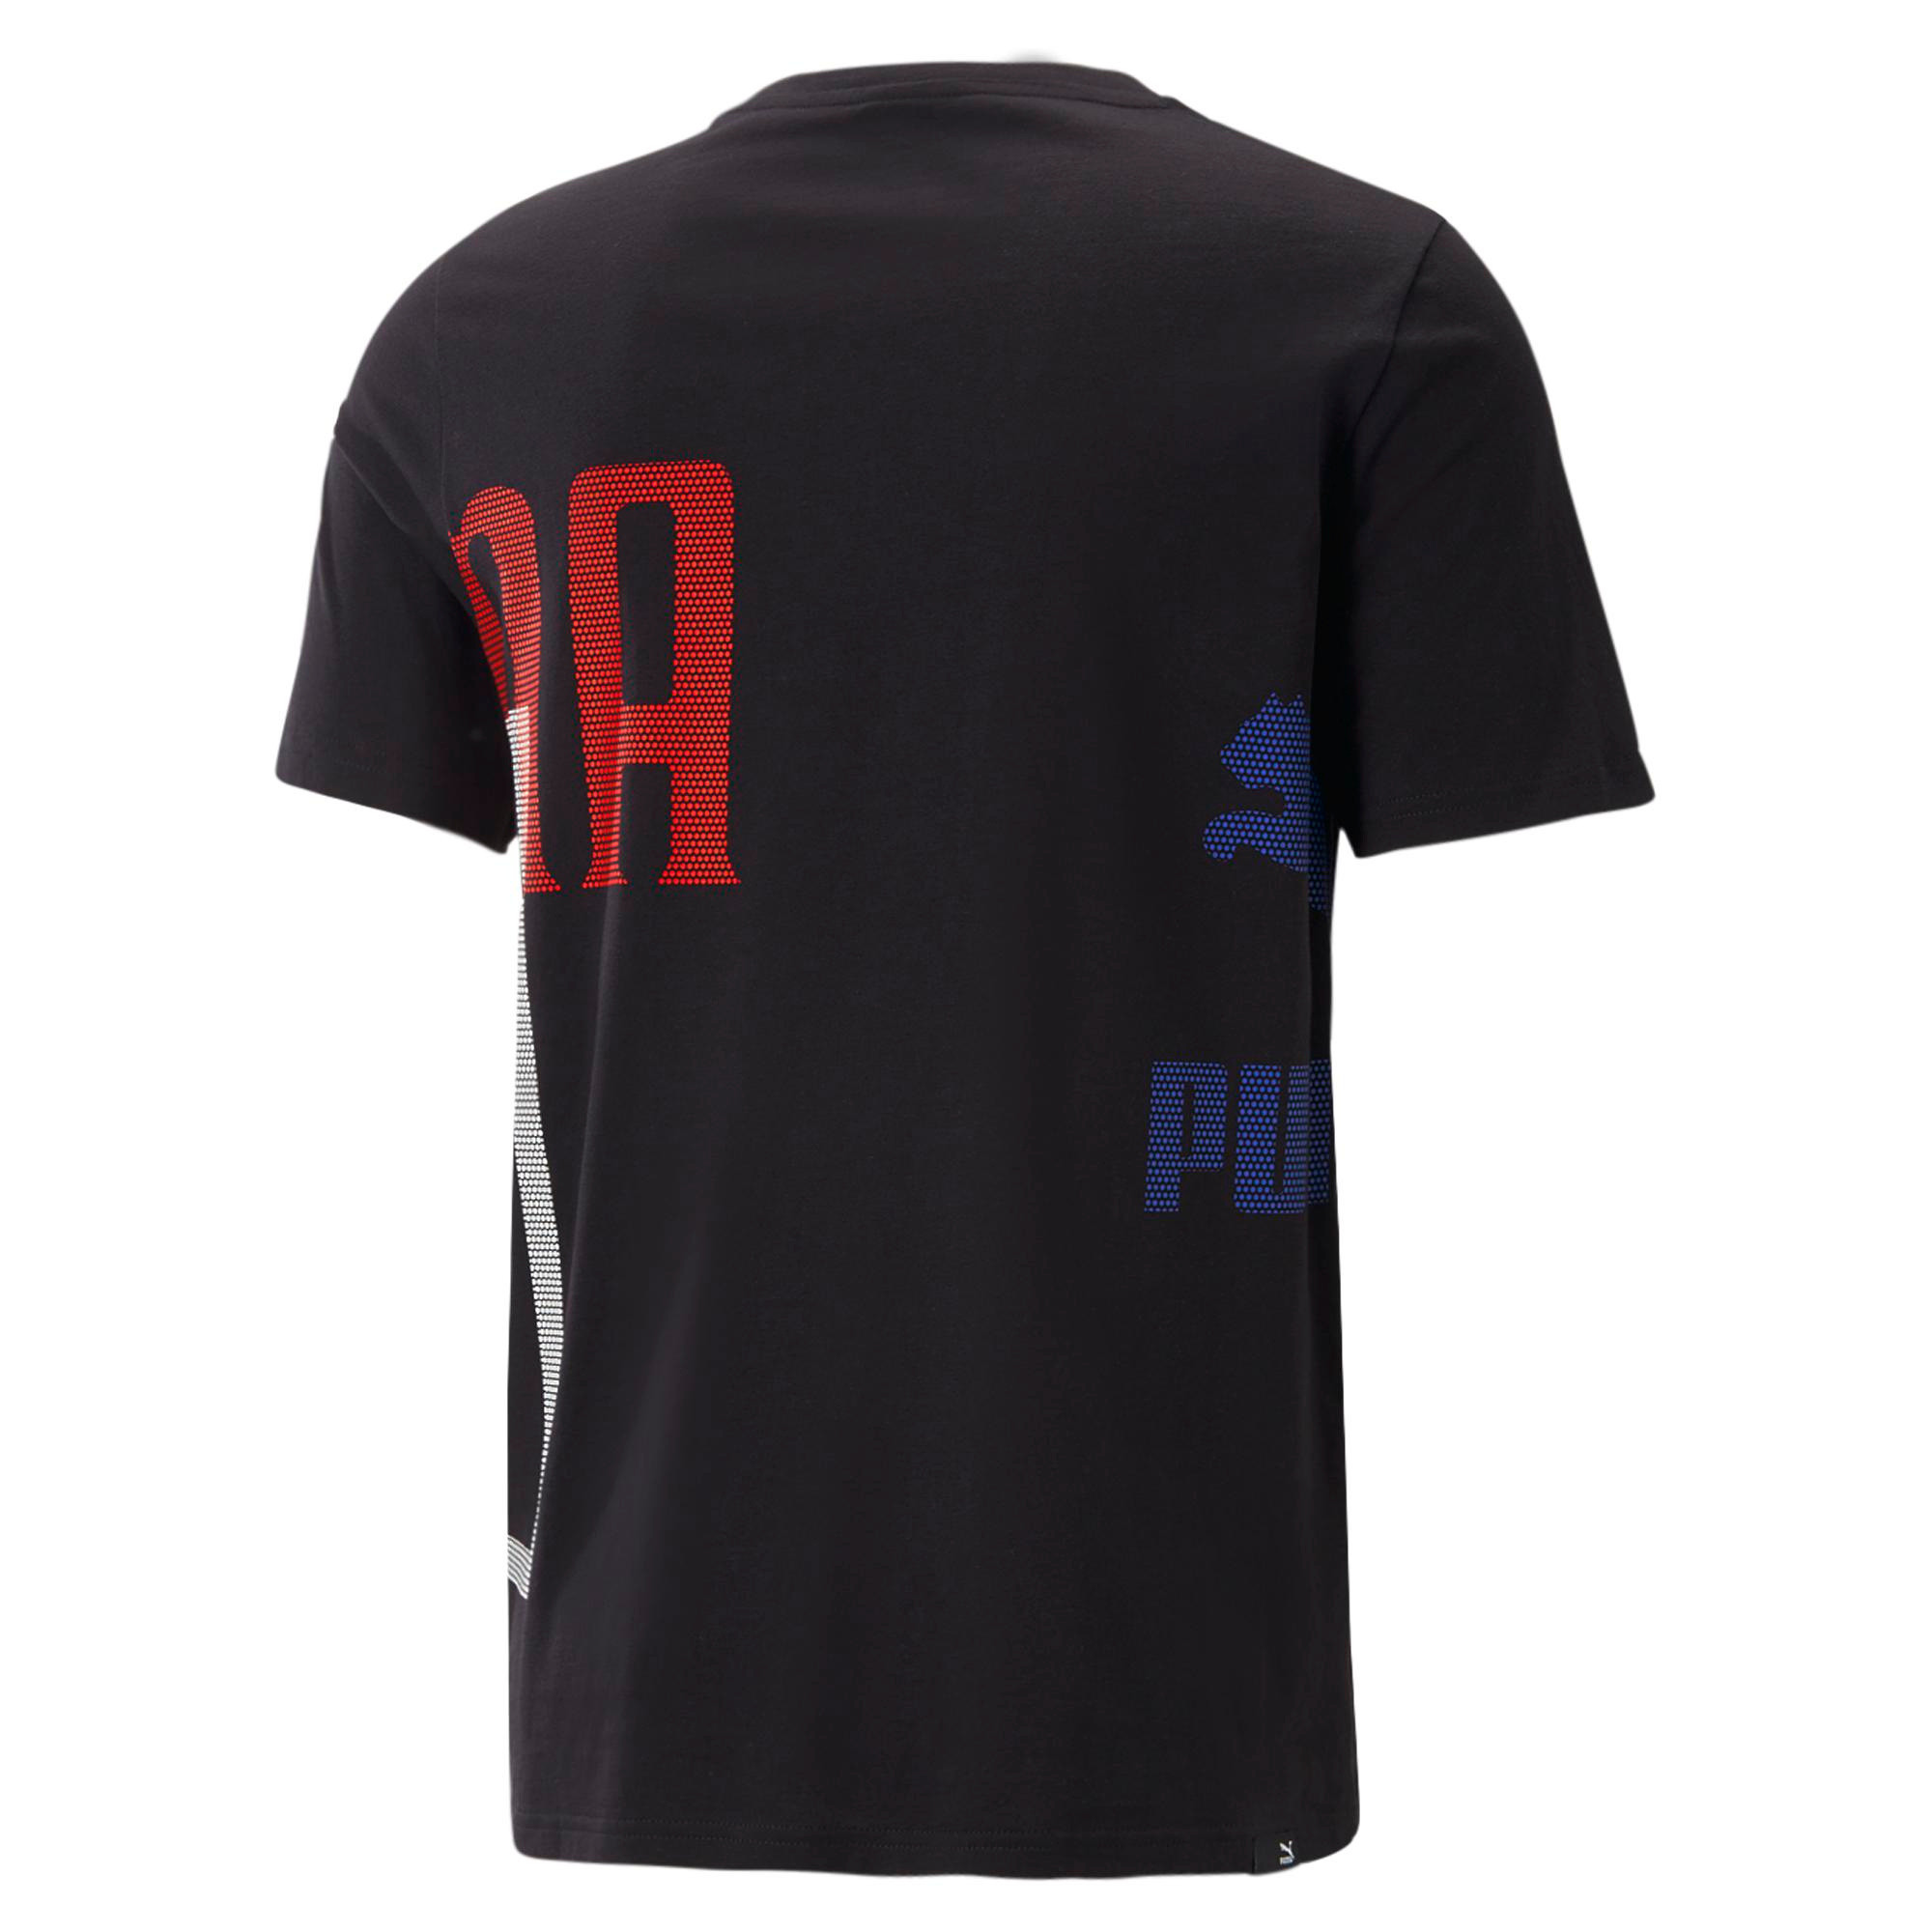 Puma - T-shirt in cotone con logo, Nero, large image number 1